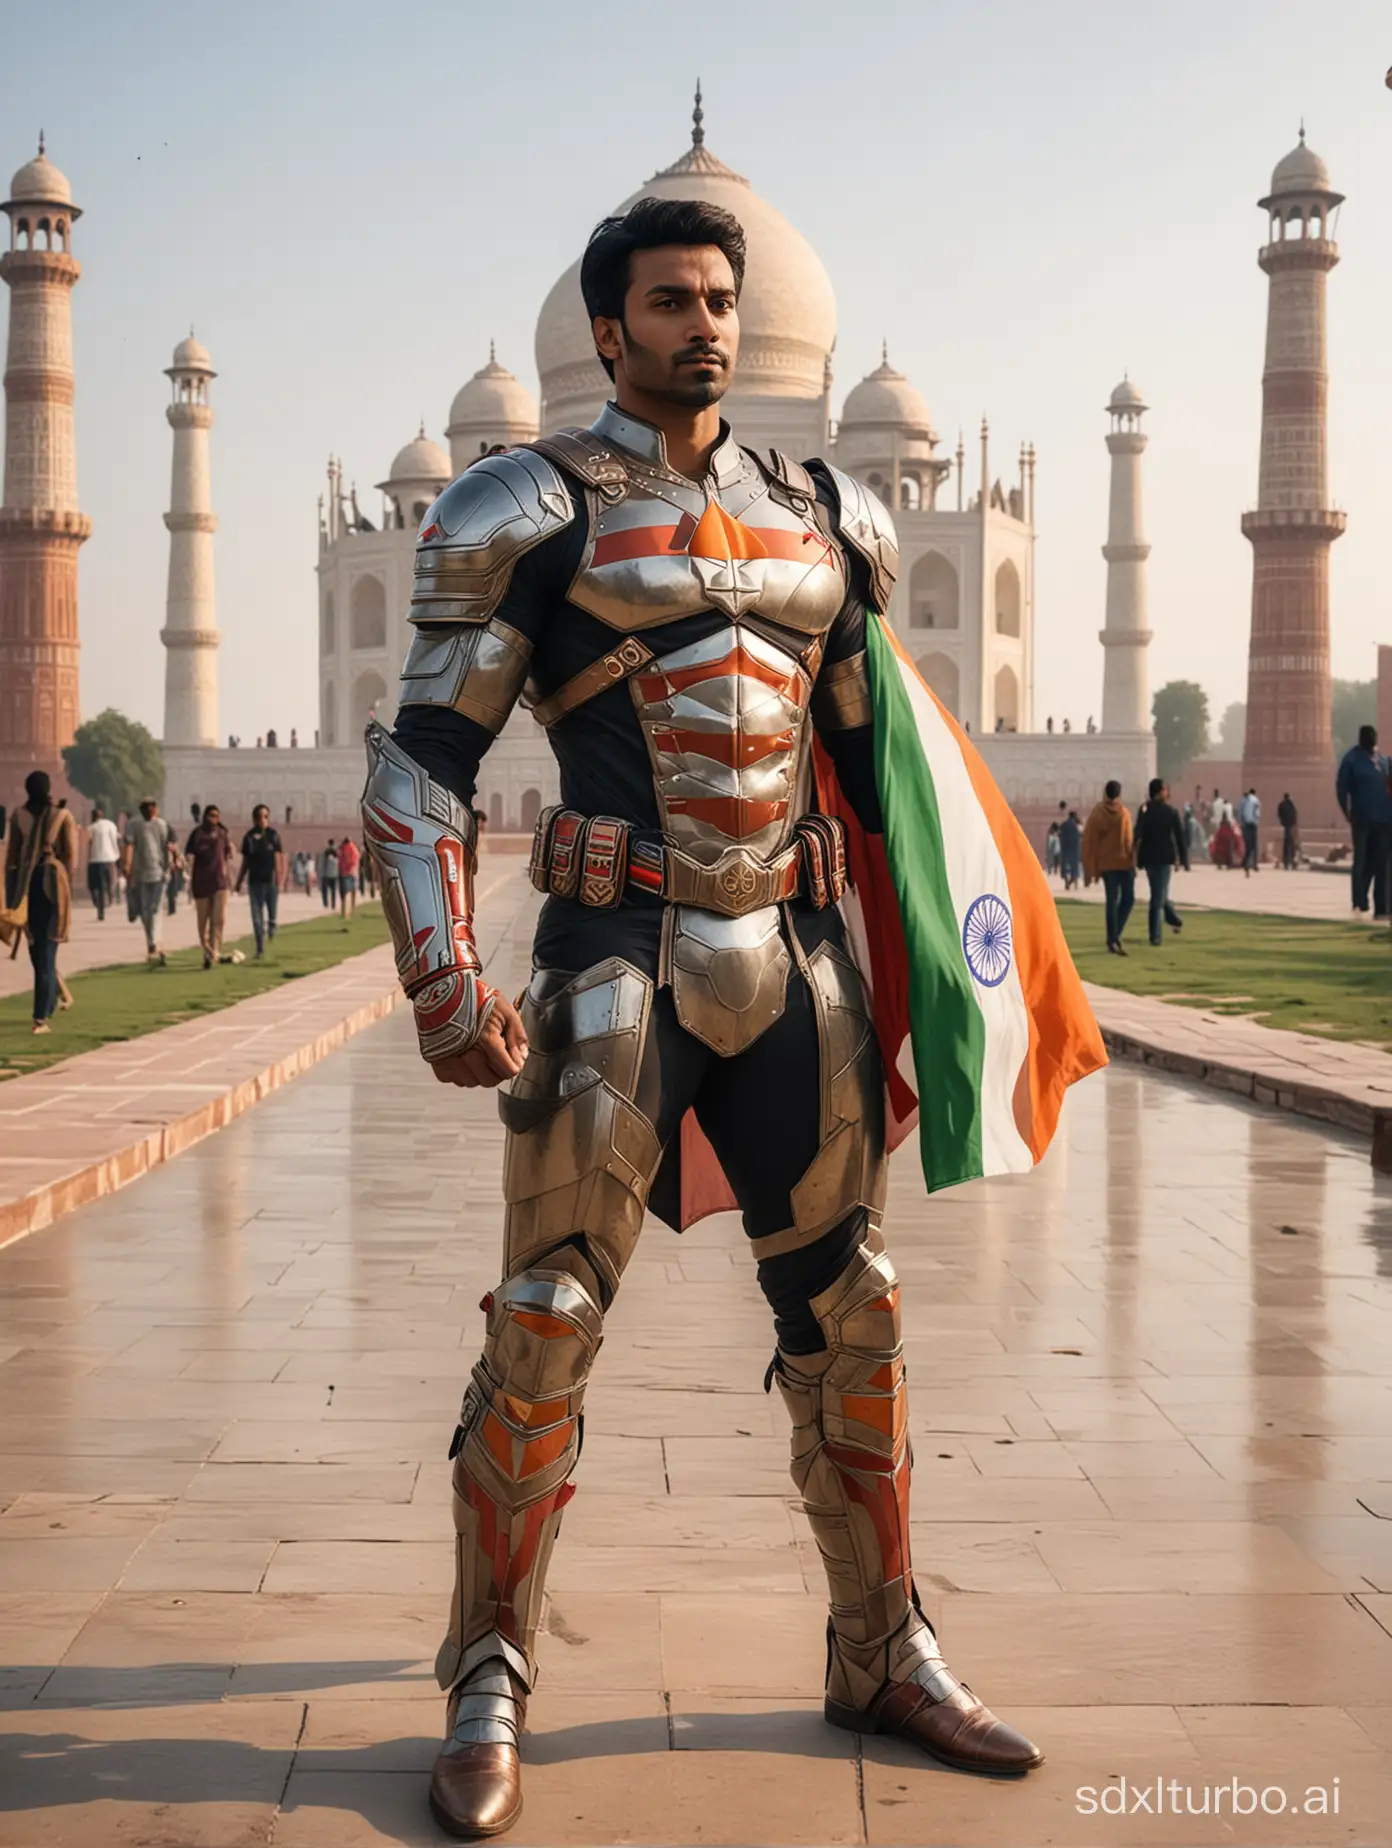 Create a superhero with Indian origin wearing armoured costume with indian flag colours and he’s standing near Taj mahal